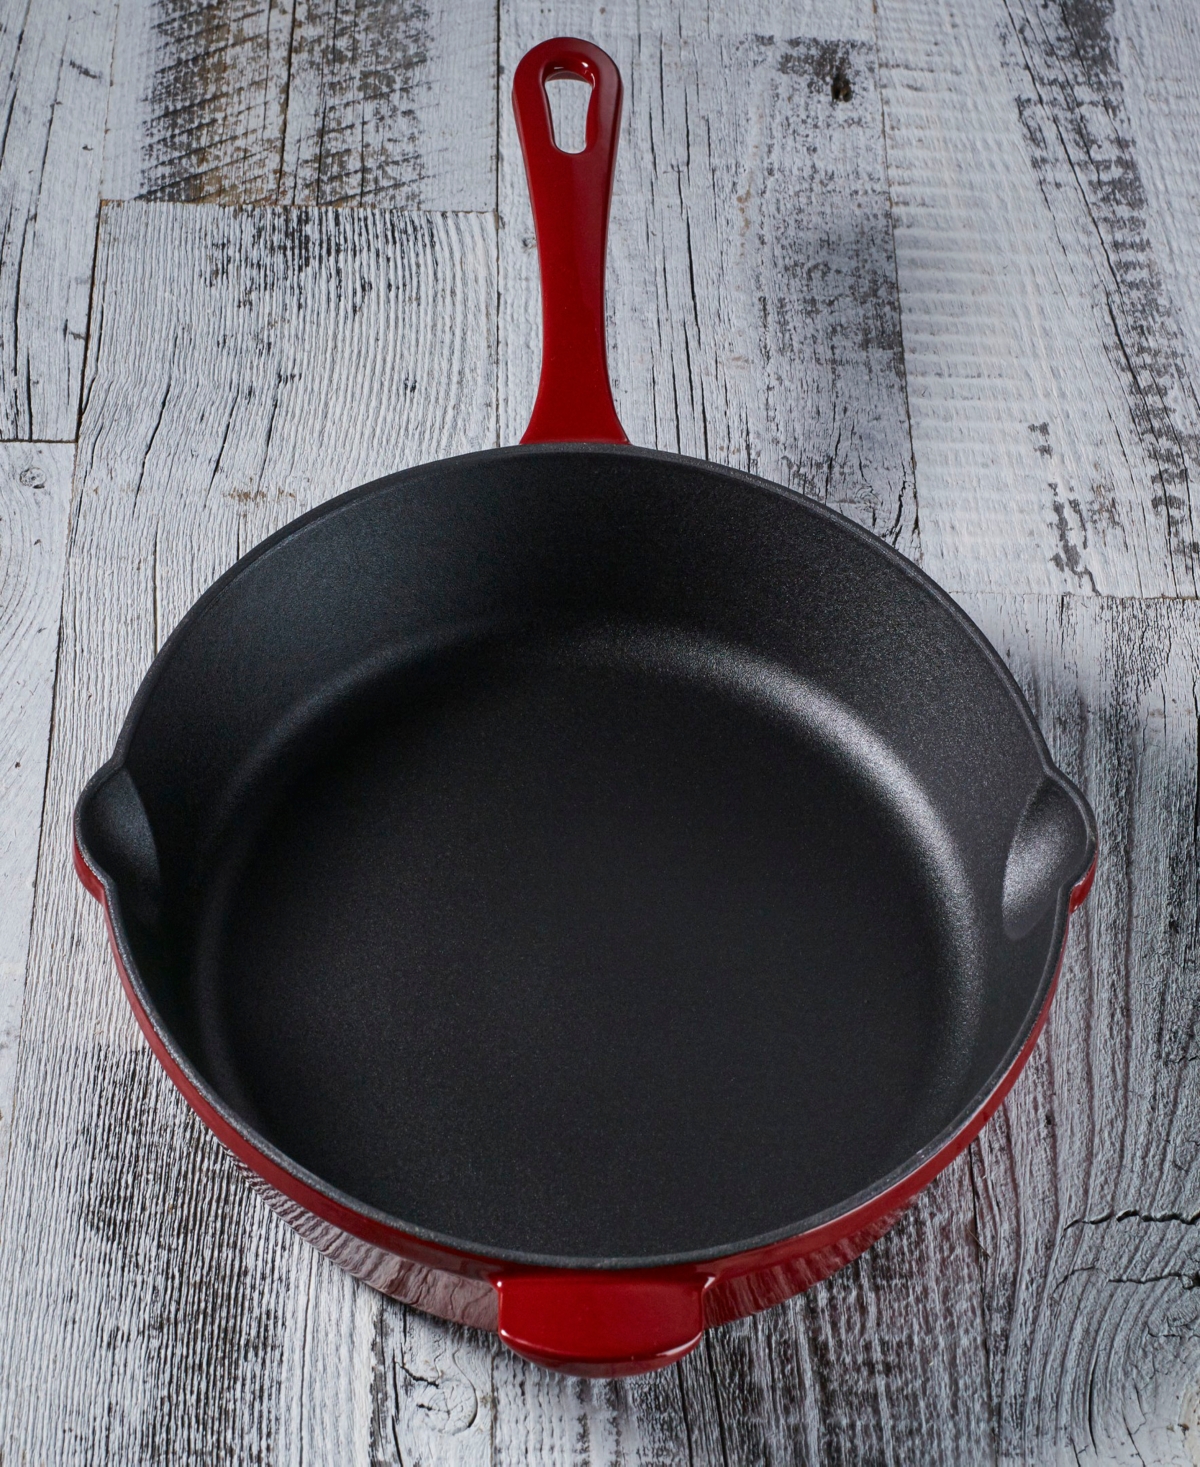 Cuisinart Chefs Classic Enameled Cast Iron 10" Skillet In Red